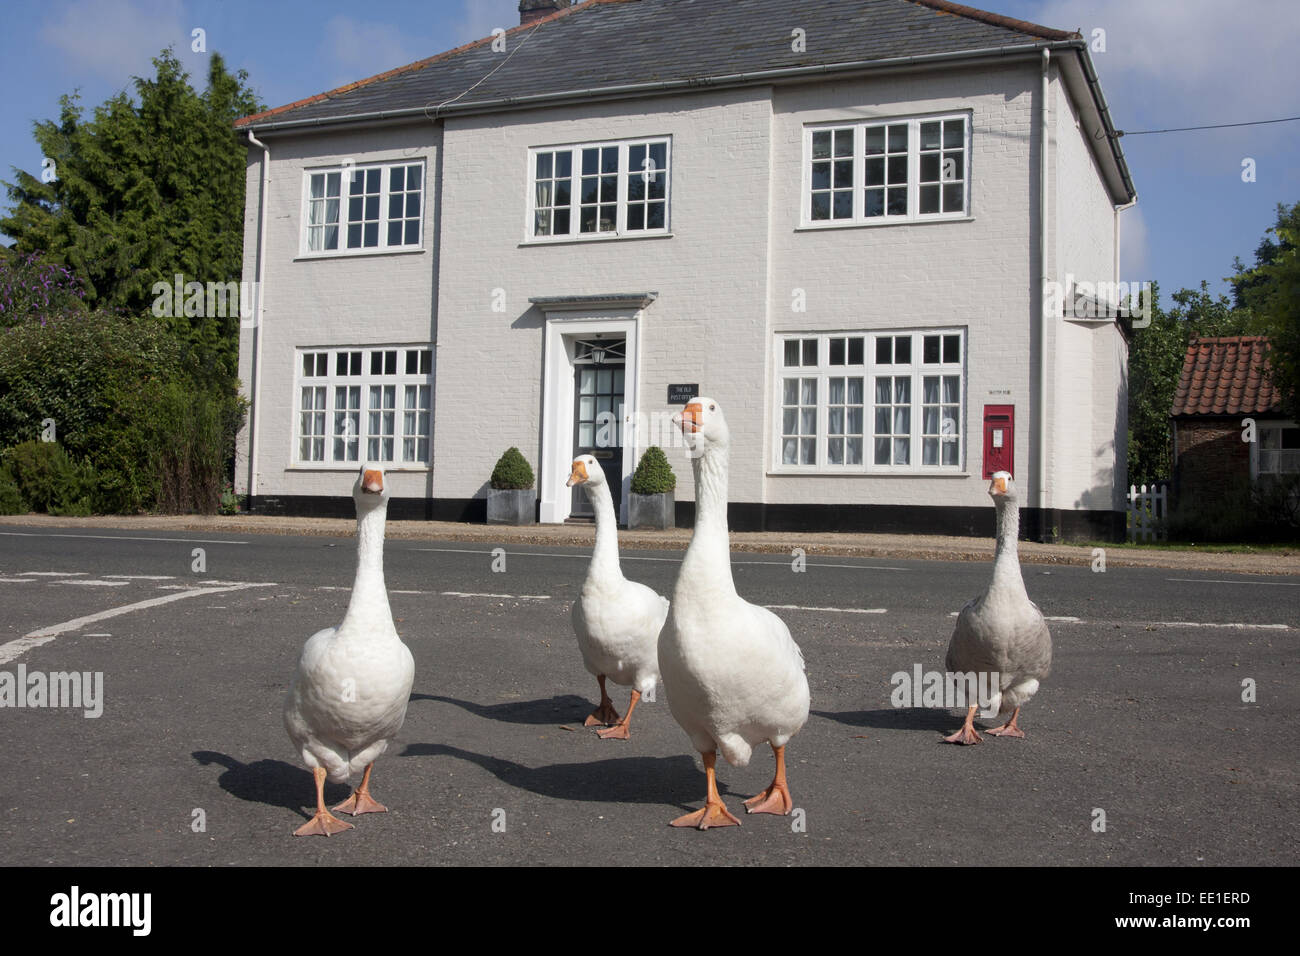 Domestic Goose, four adults, walking on road beside 'The Old Post Office' building, Stanhoe, Norfolk, England, July Stock Photo